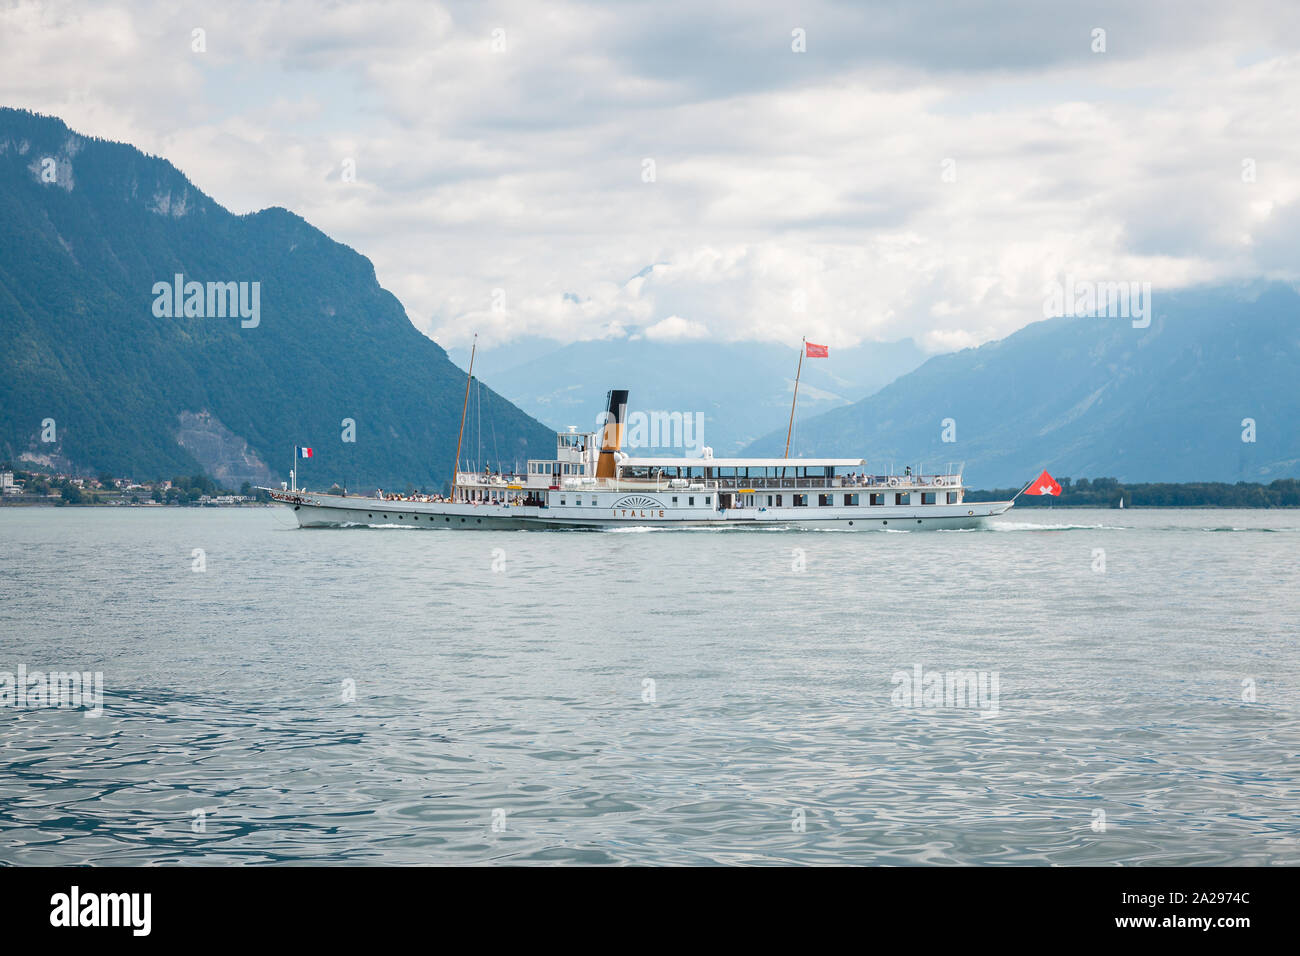 Traditional passenger paddle boat named Italie cruising on the Lake Geneva (Lac Leman) along Swiss shore with Alps mountains on the background Stock Photo